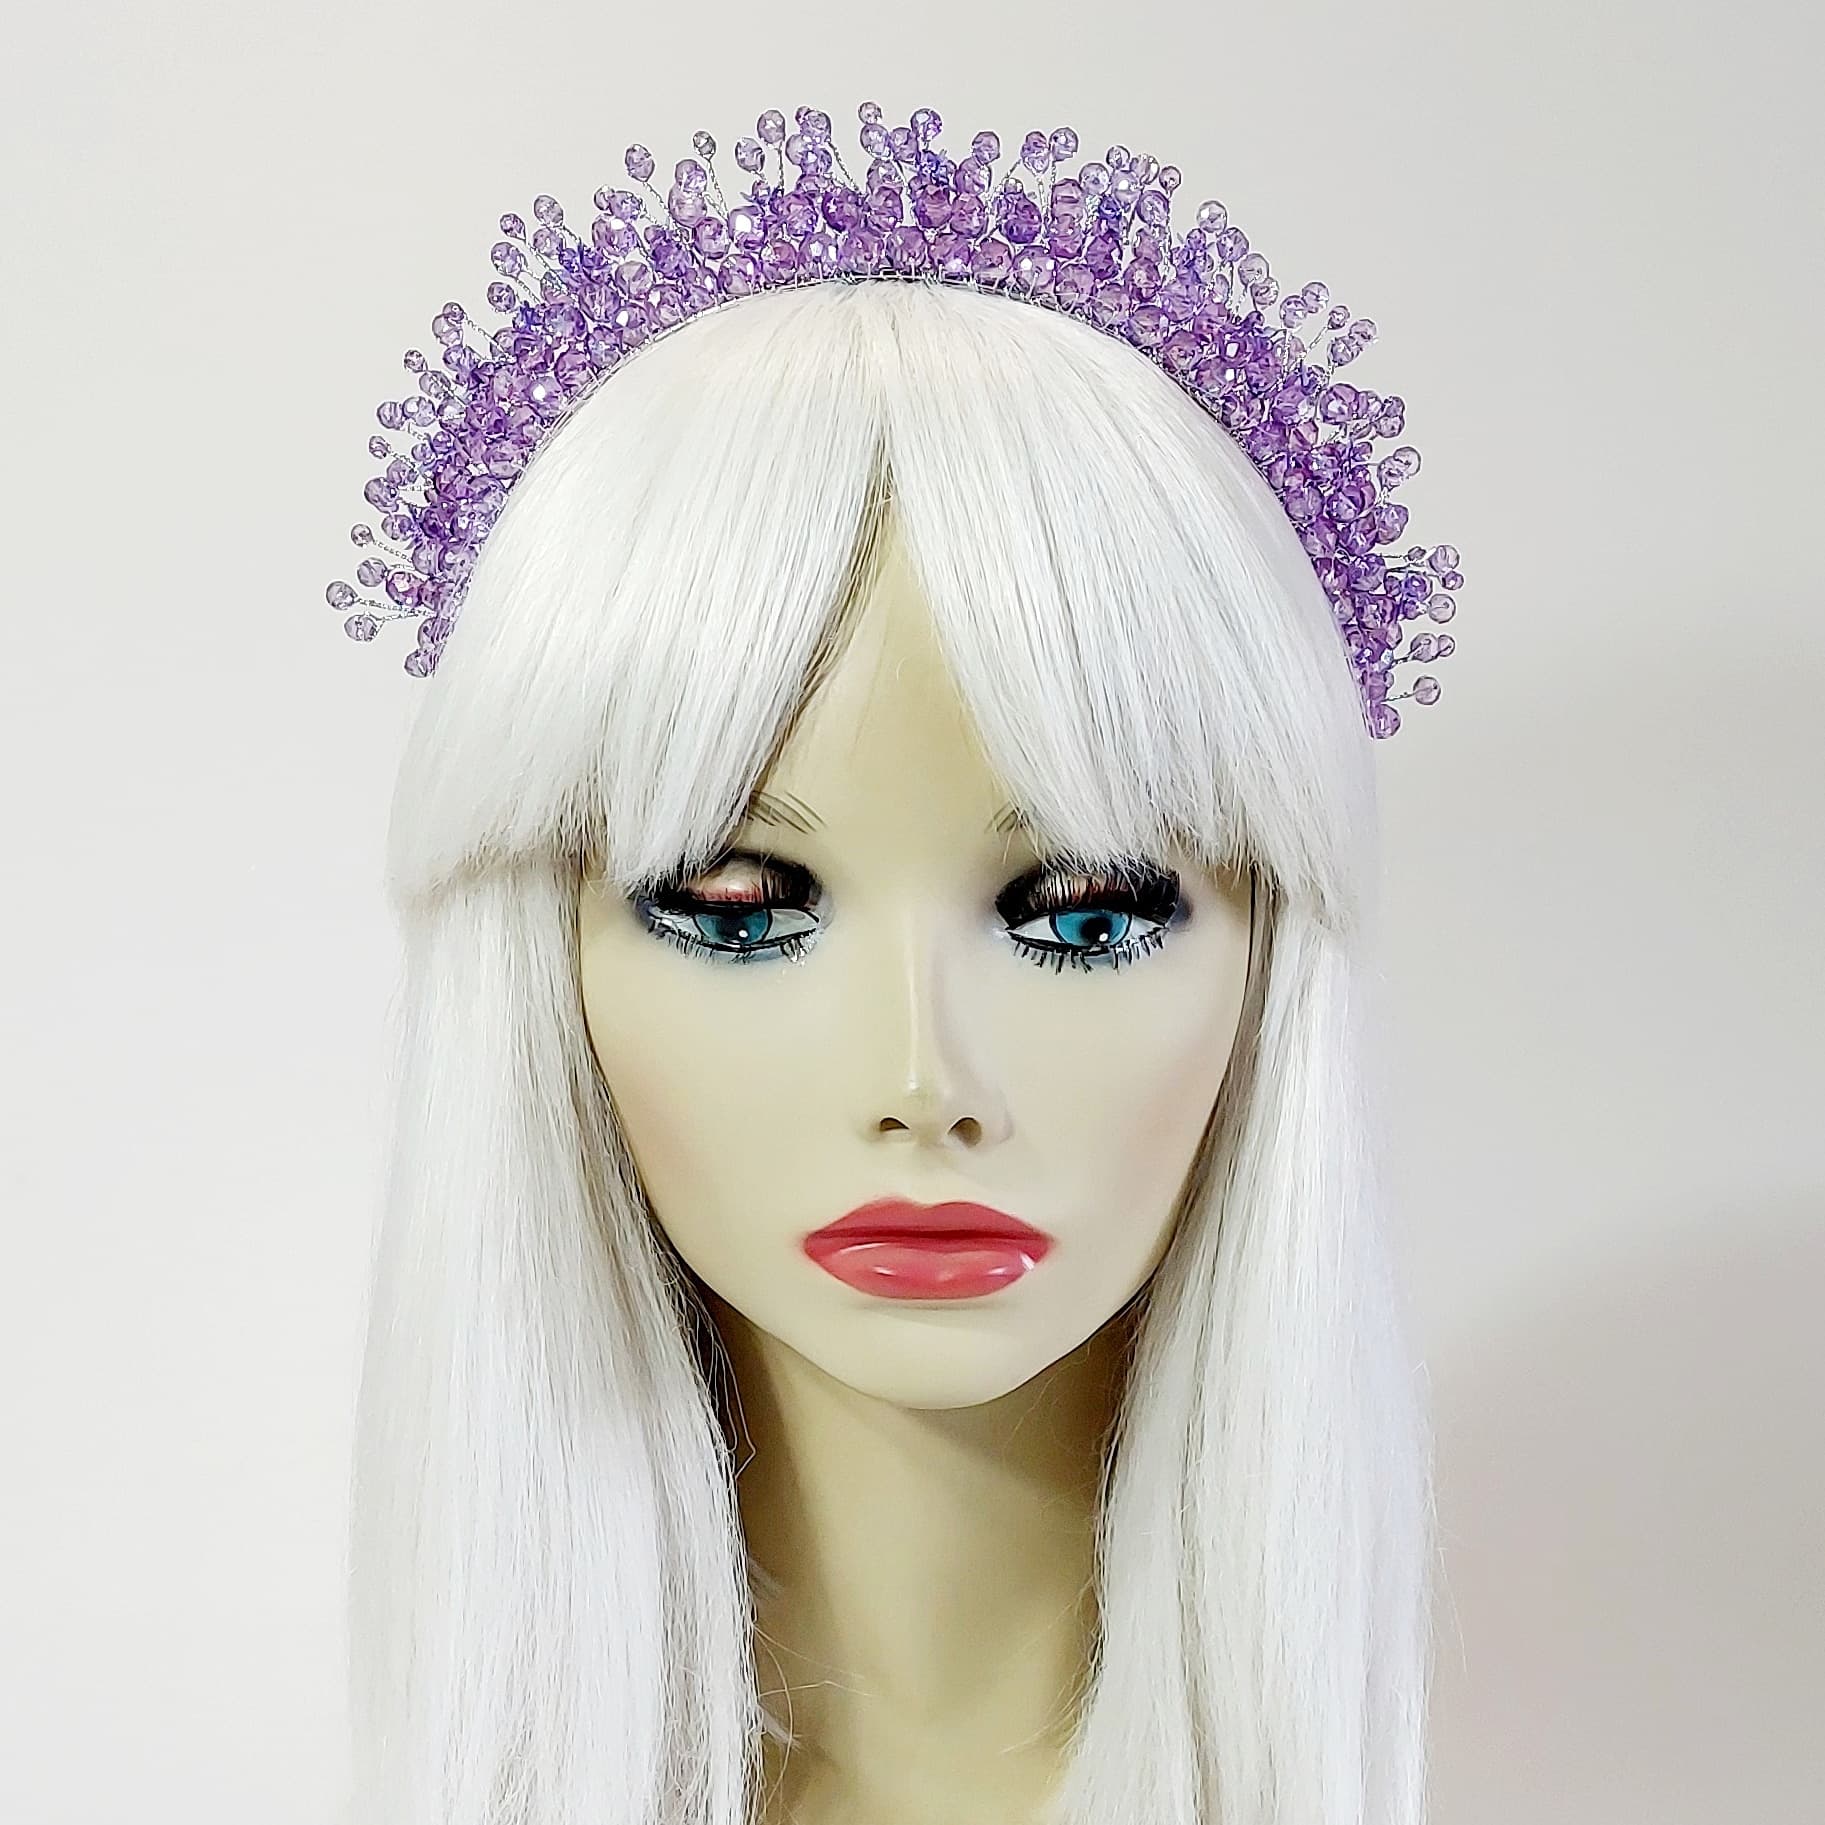 petite vintage style lilac purple crystal headpiece for the races